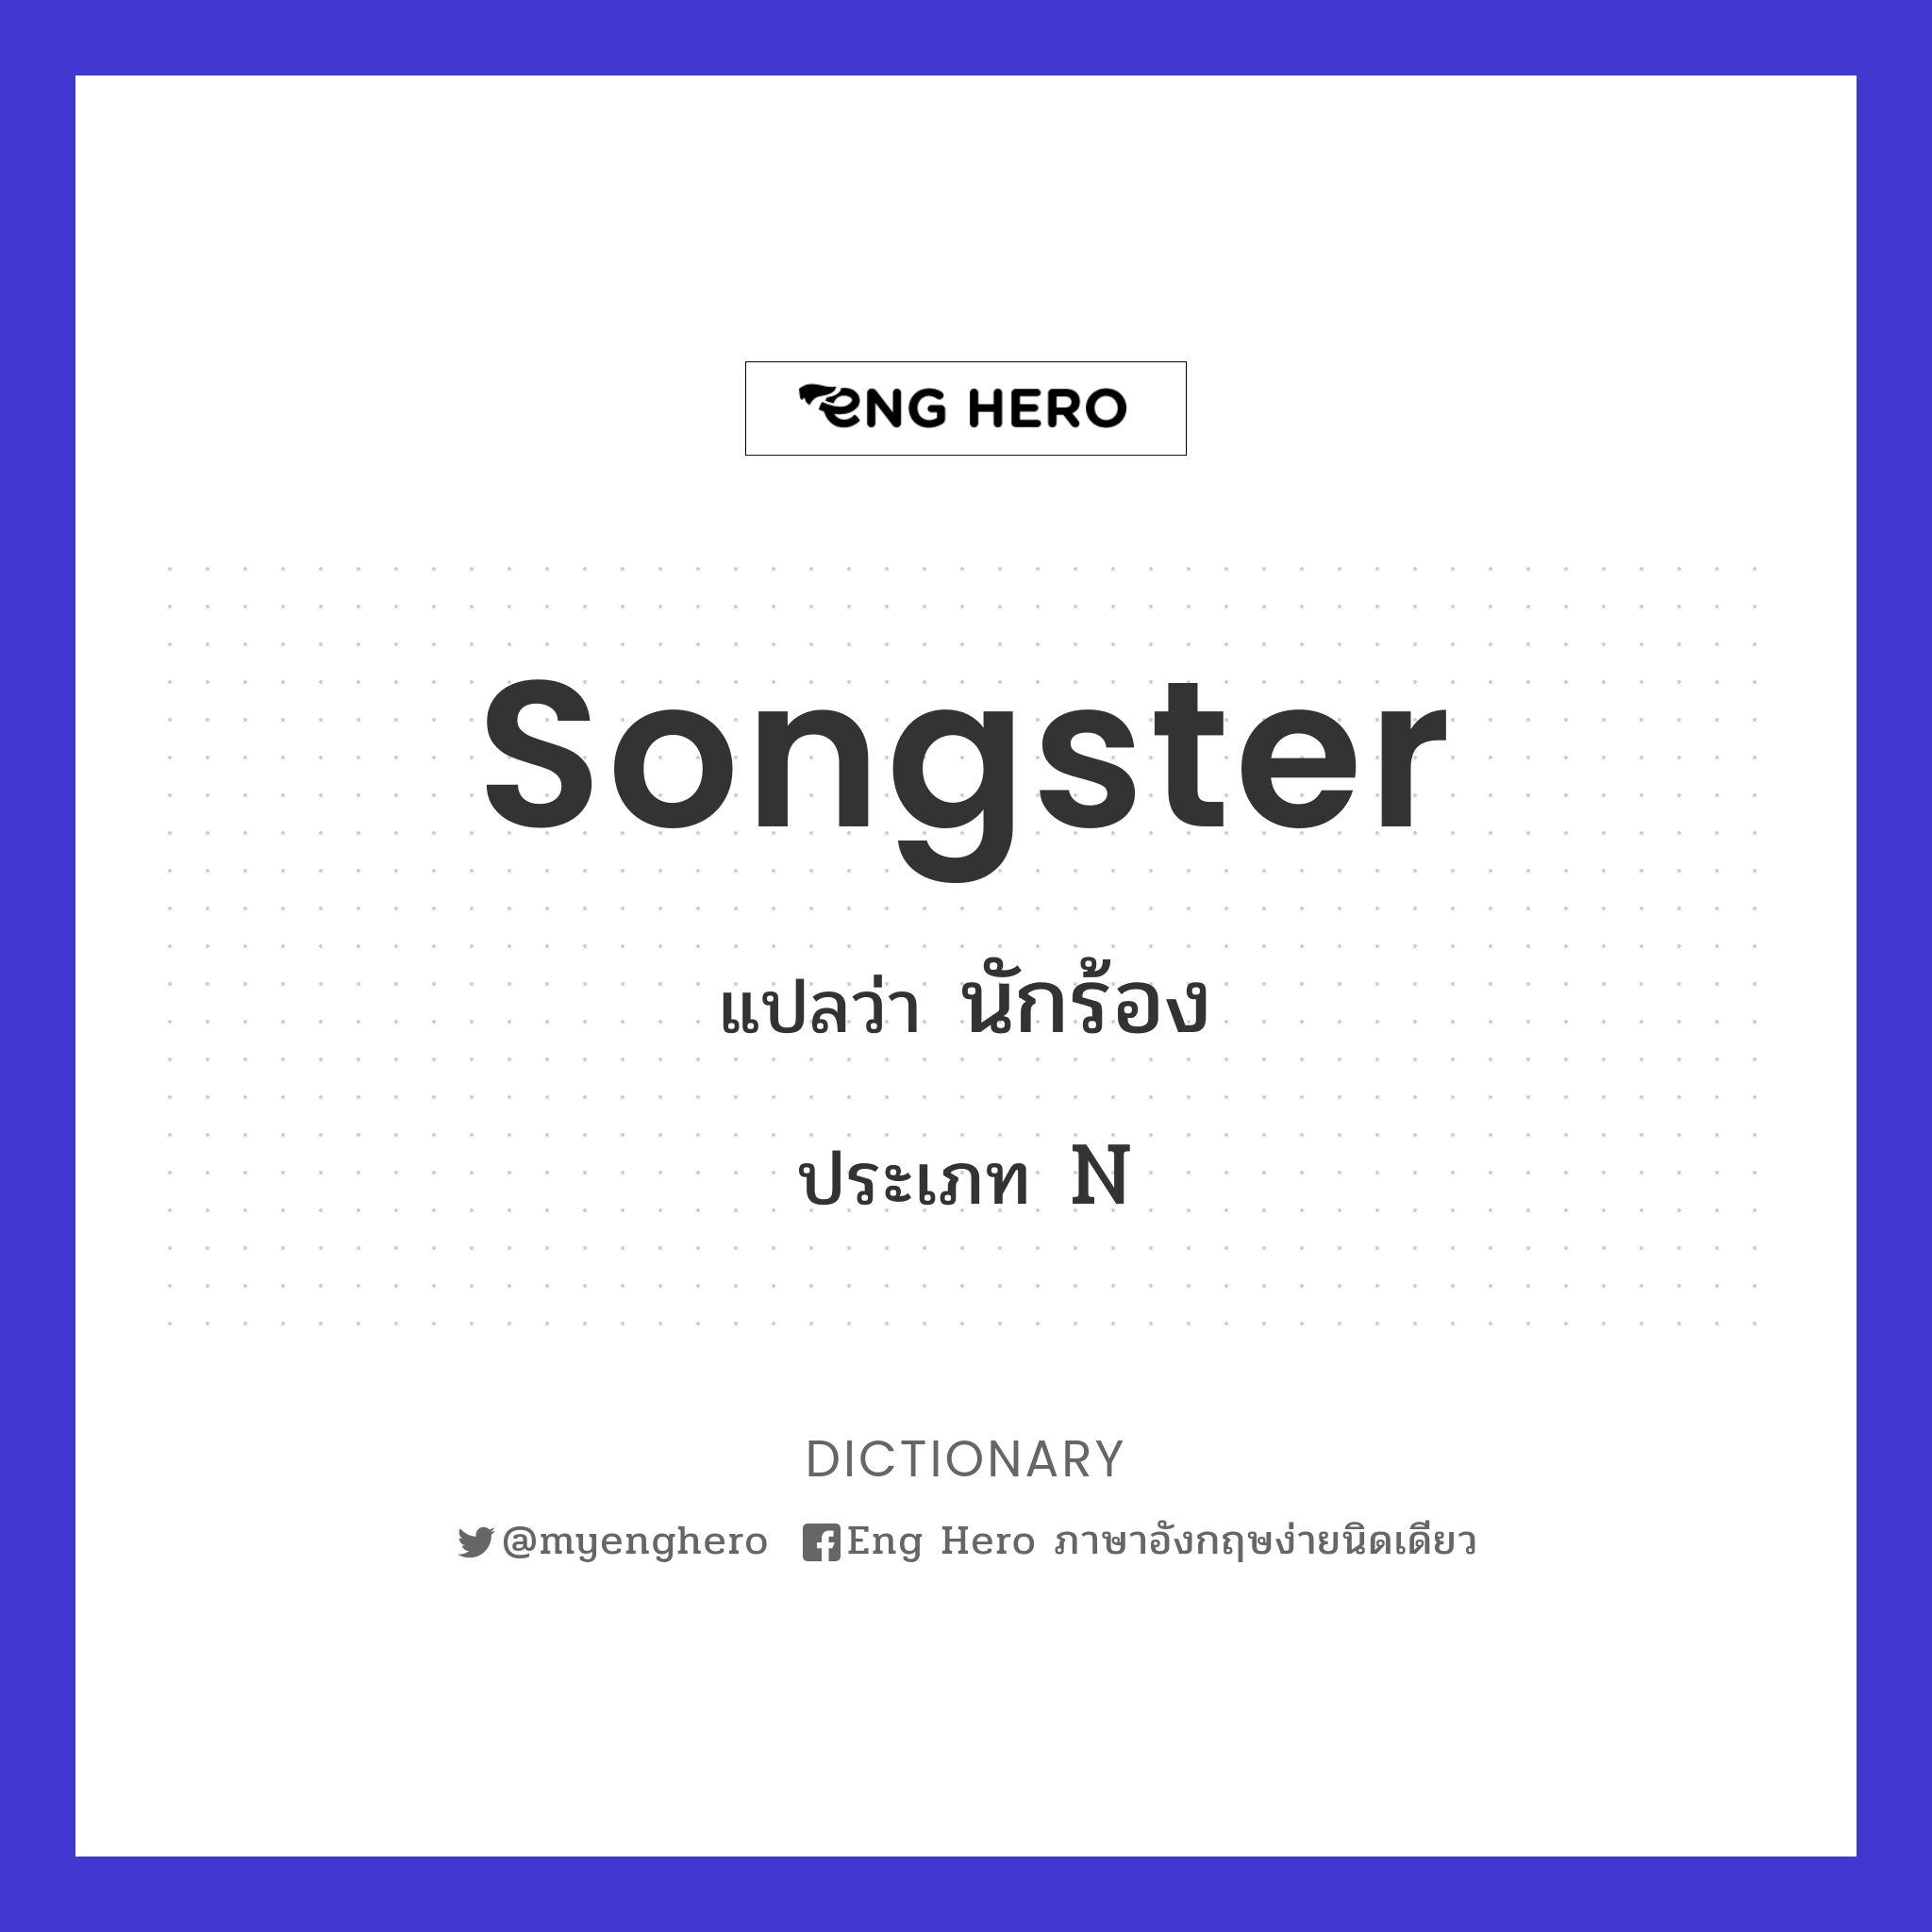 songster